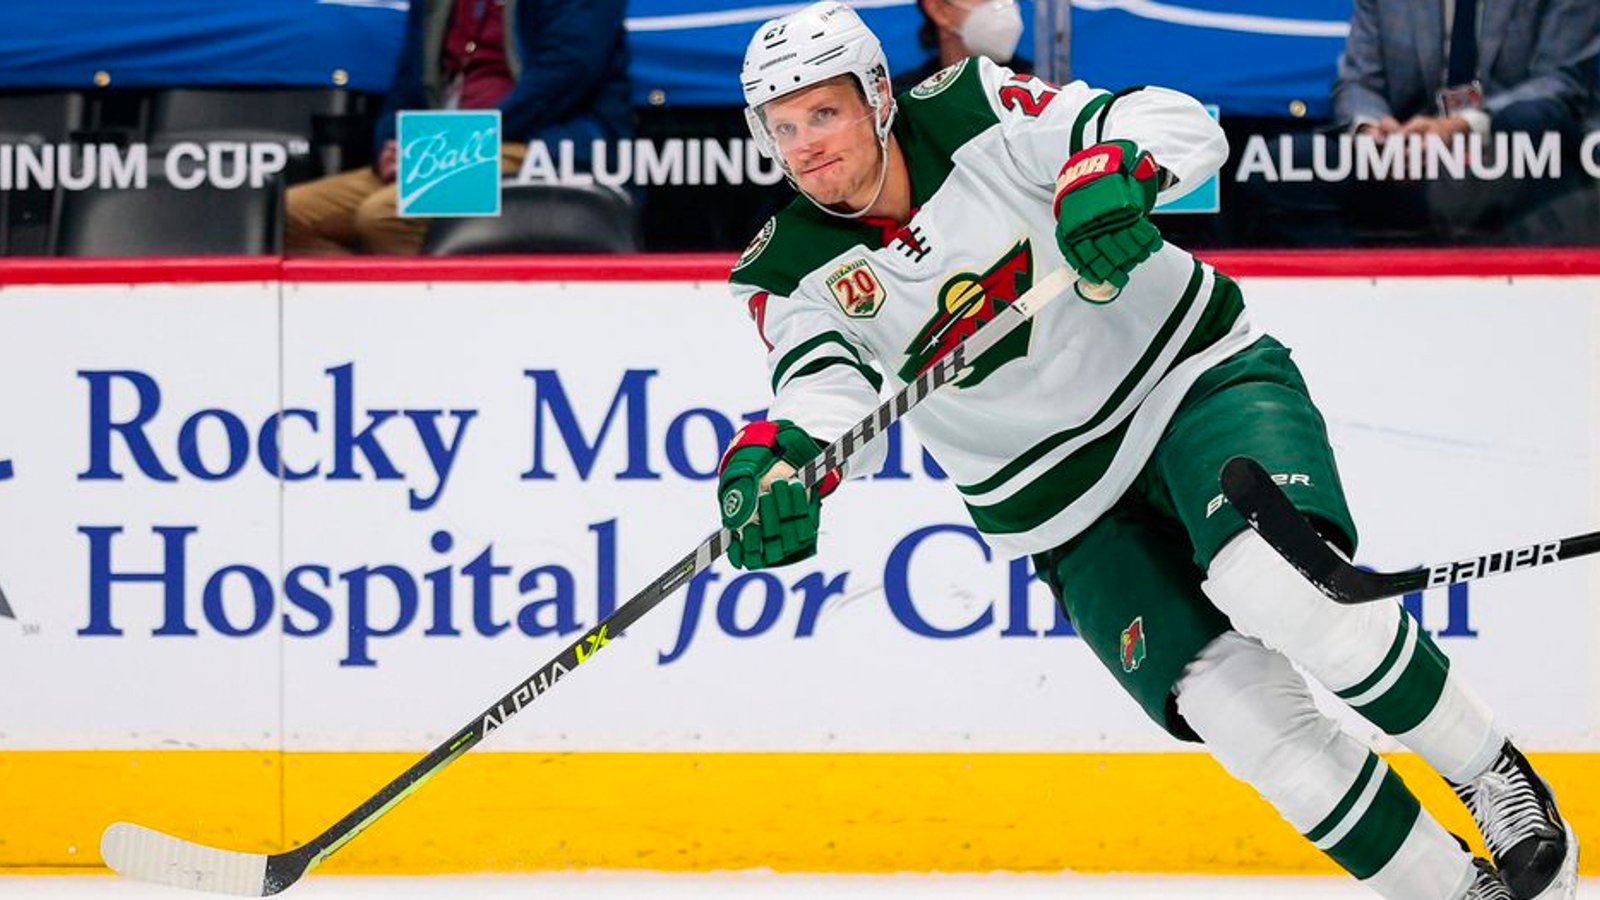 Wild sign Bjugstad to an interesting contract extension